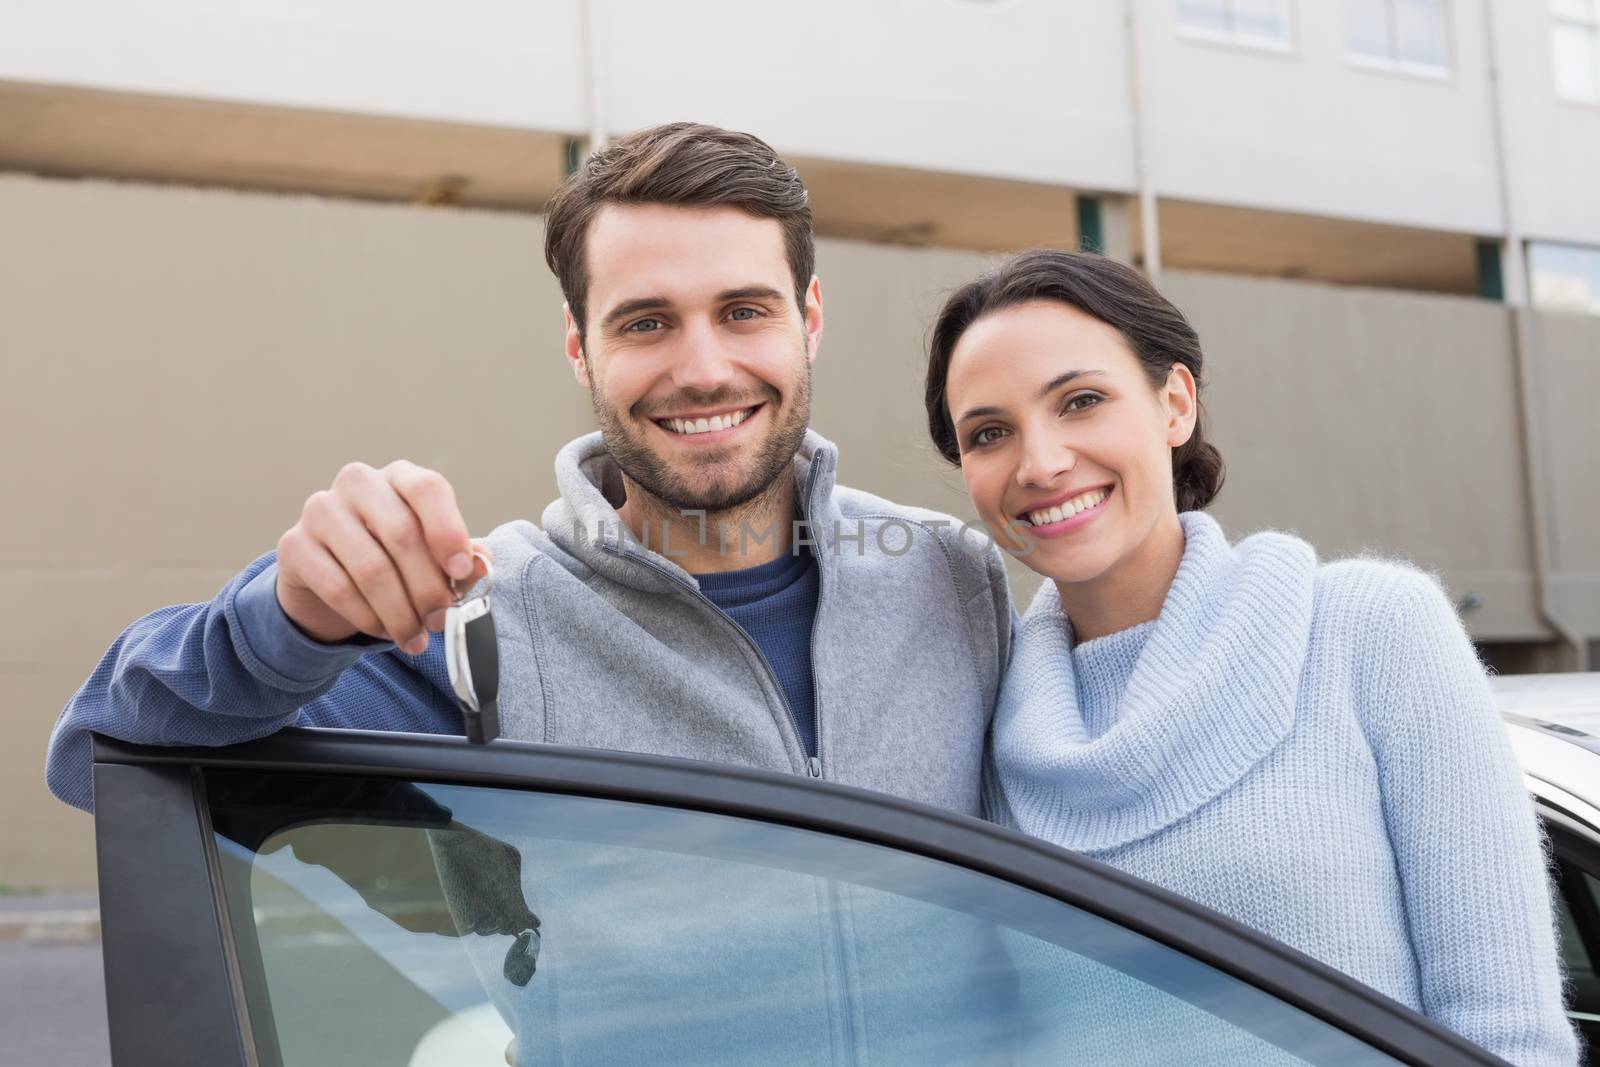 Young couple smiling holding new key outside their car